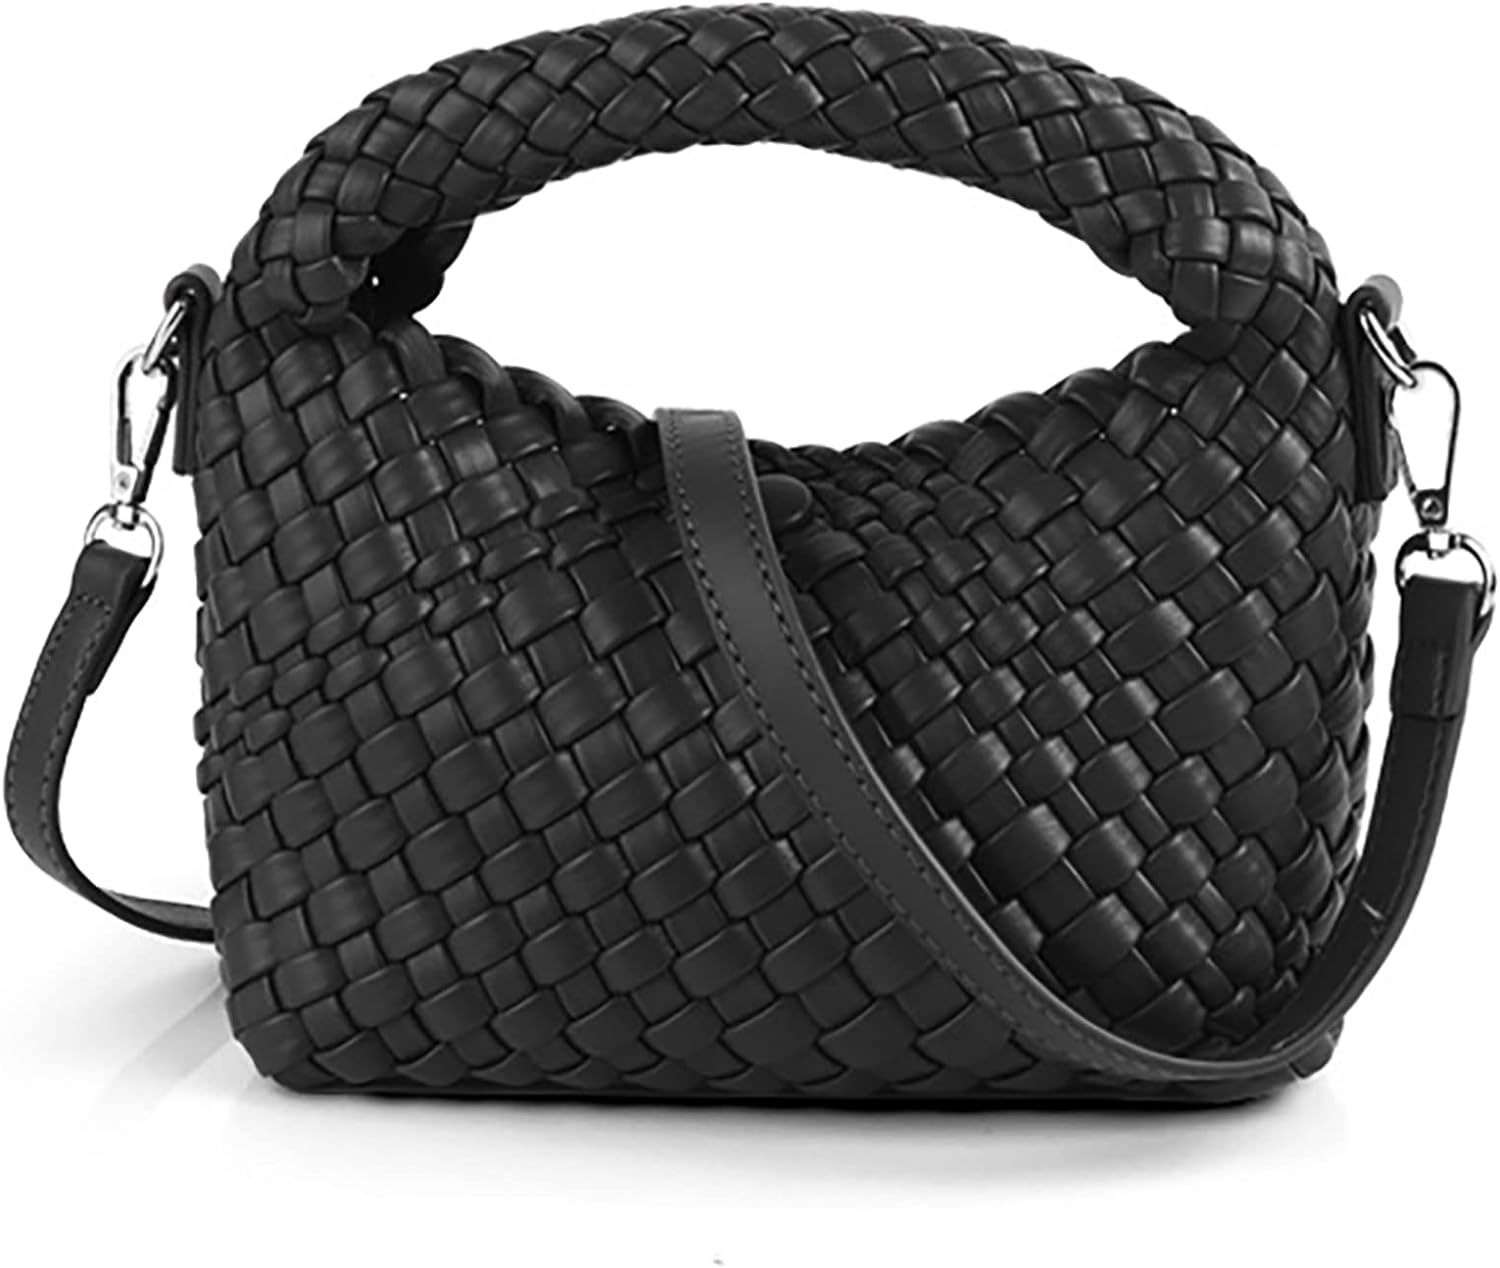 Woven Purse For Women, Small Crossbody Tote Bag with Detachable Shoulder Strap, Girls Top Handle ... | Amazon (US)